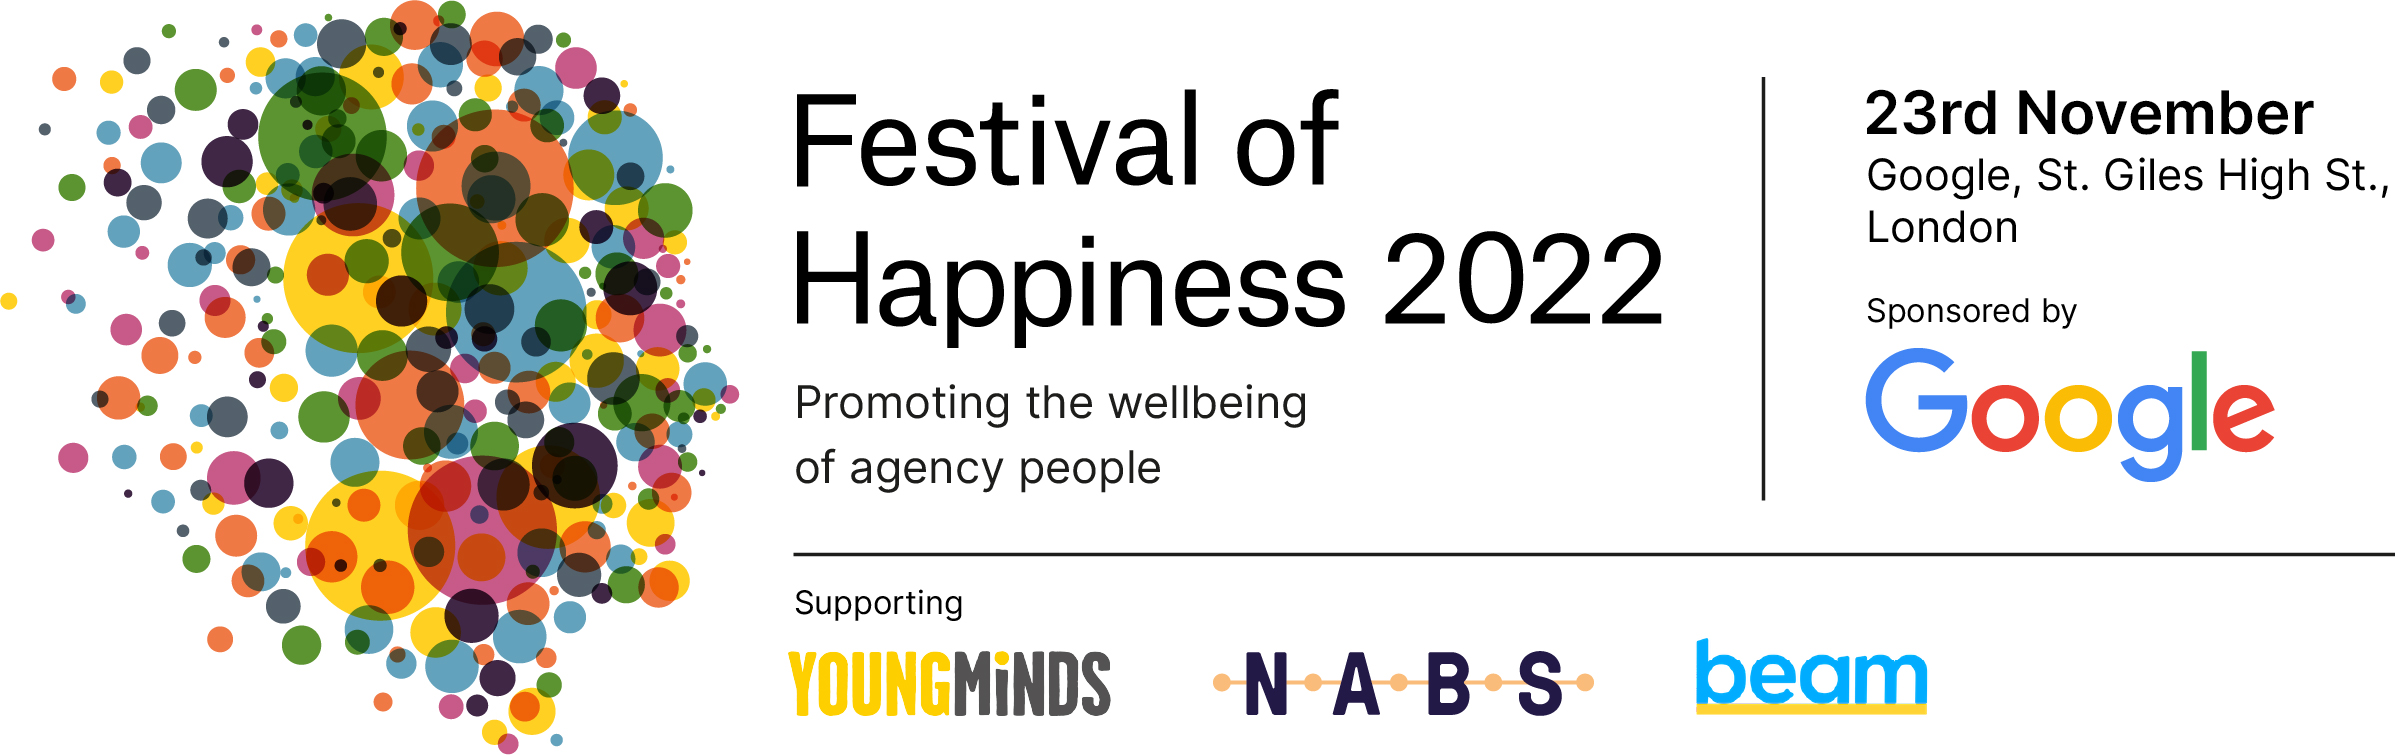 Festival of Happiness 2022 Booking Form